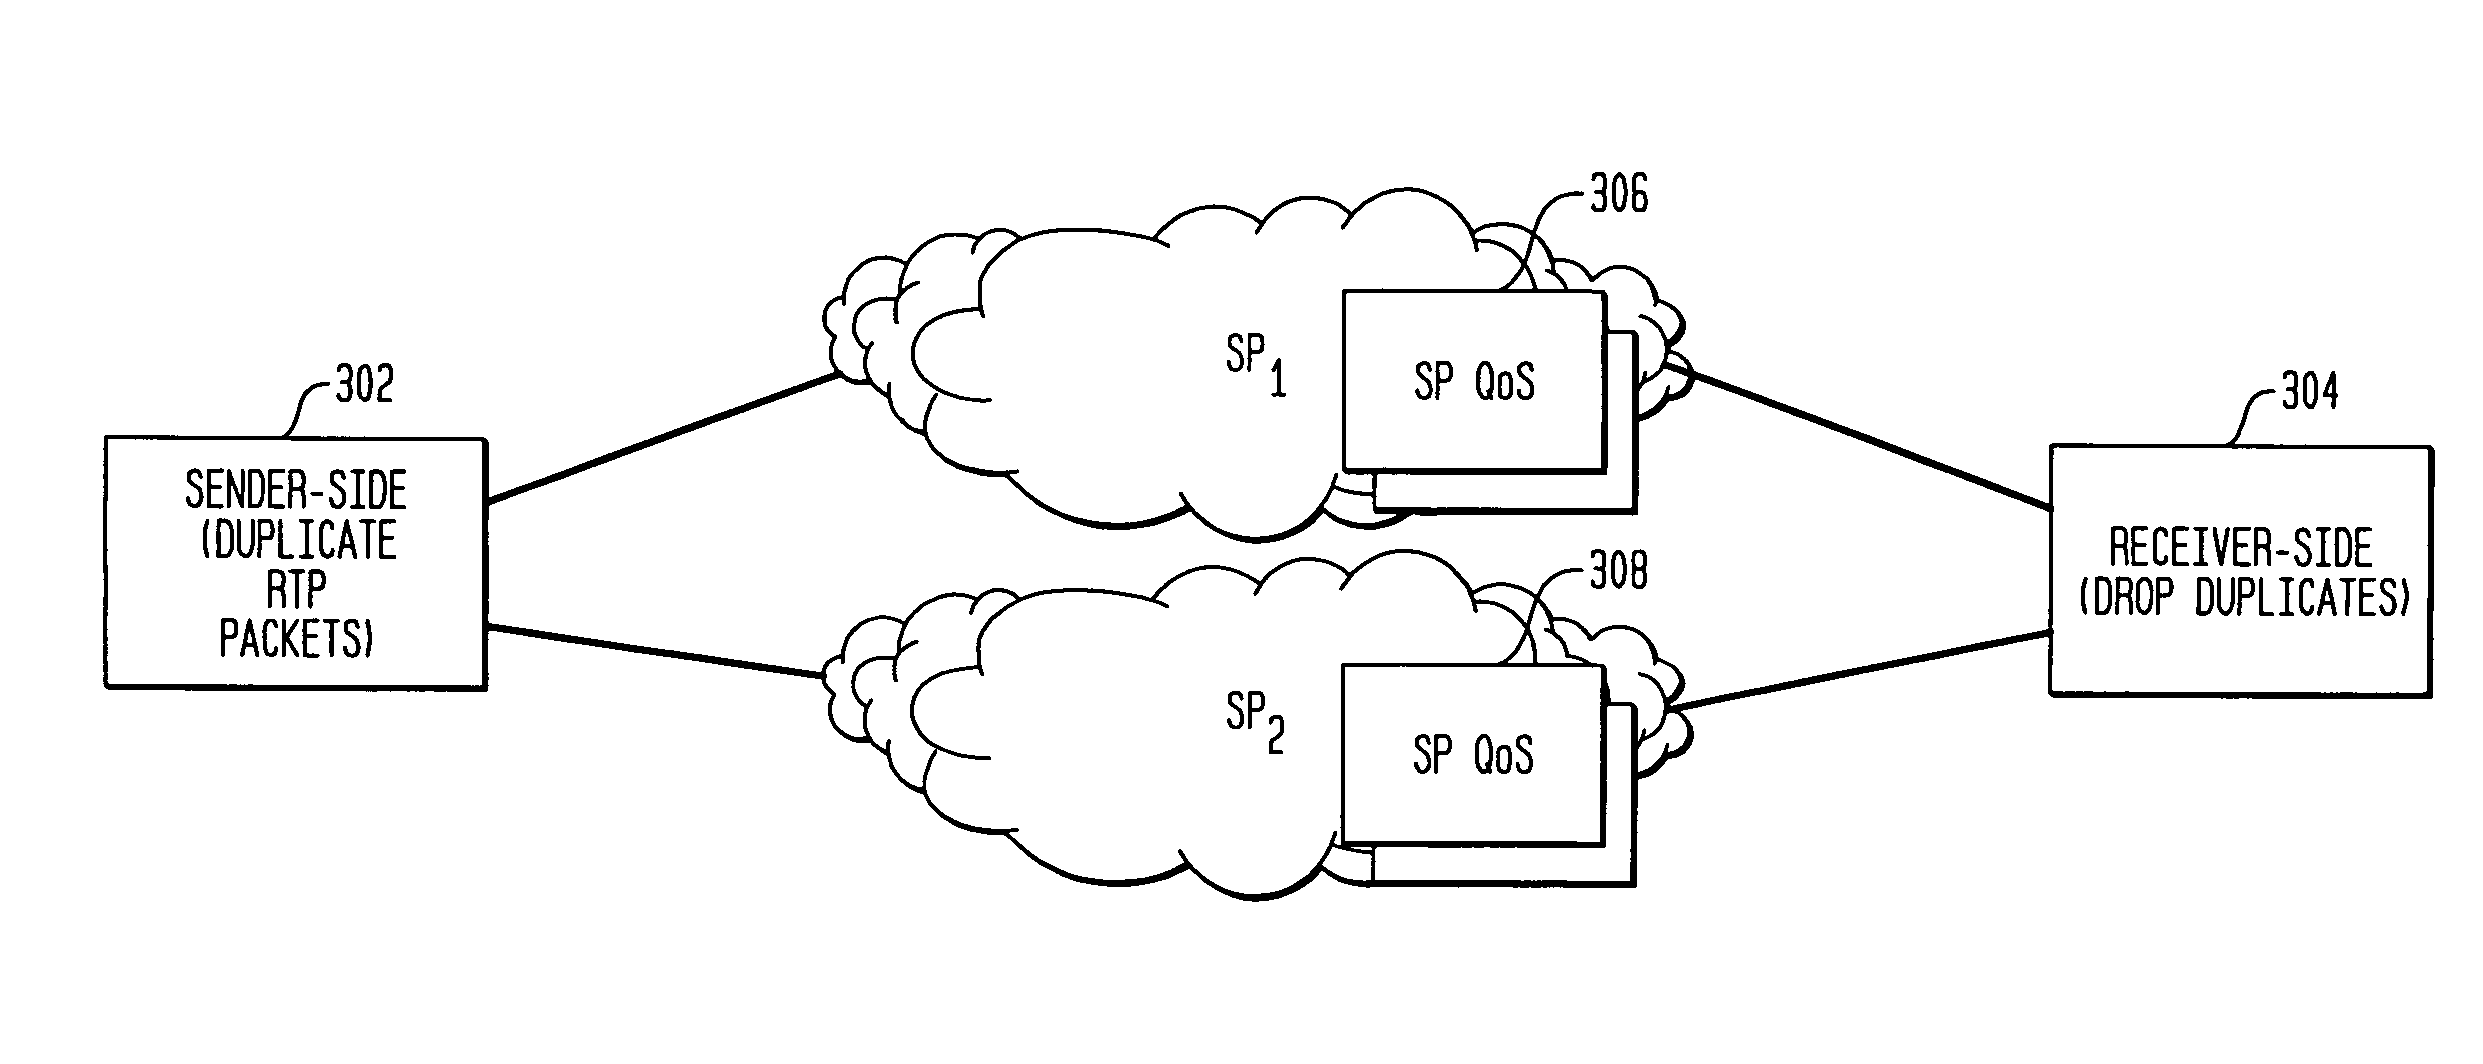 System and method to improve the resiliency and performance of enterprise networks by utilizing in-built network redundancy